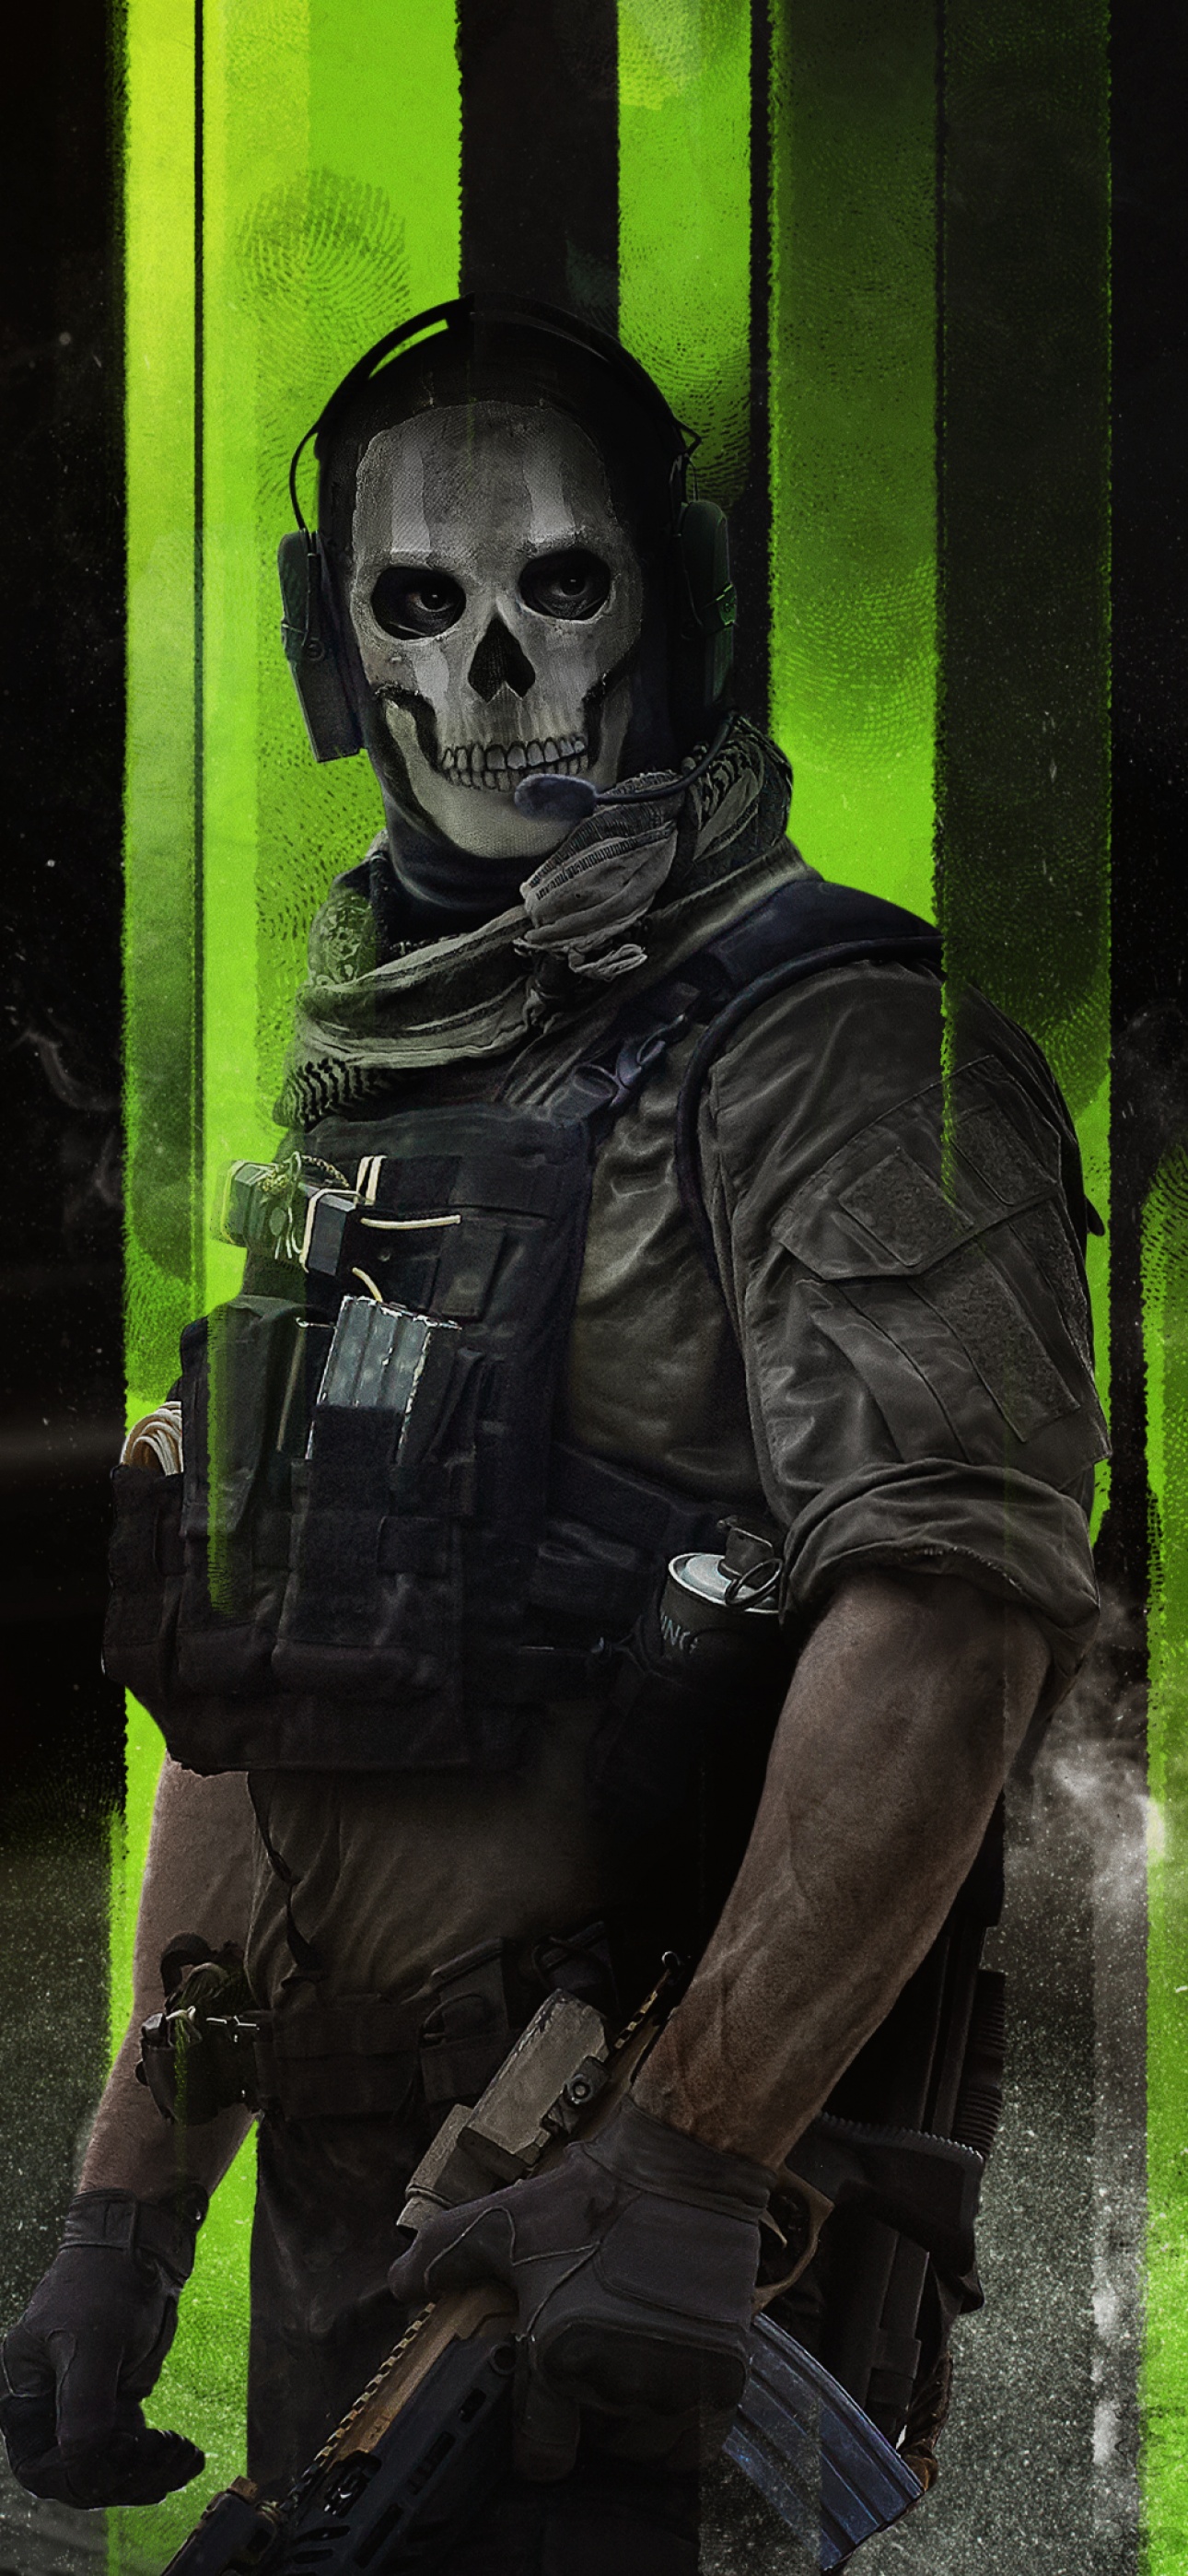 call of duty ghost wallpaper